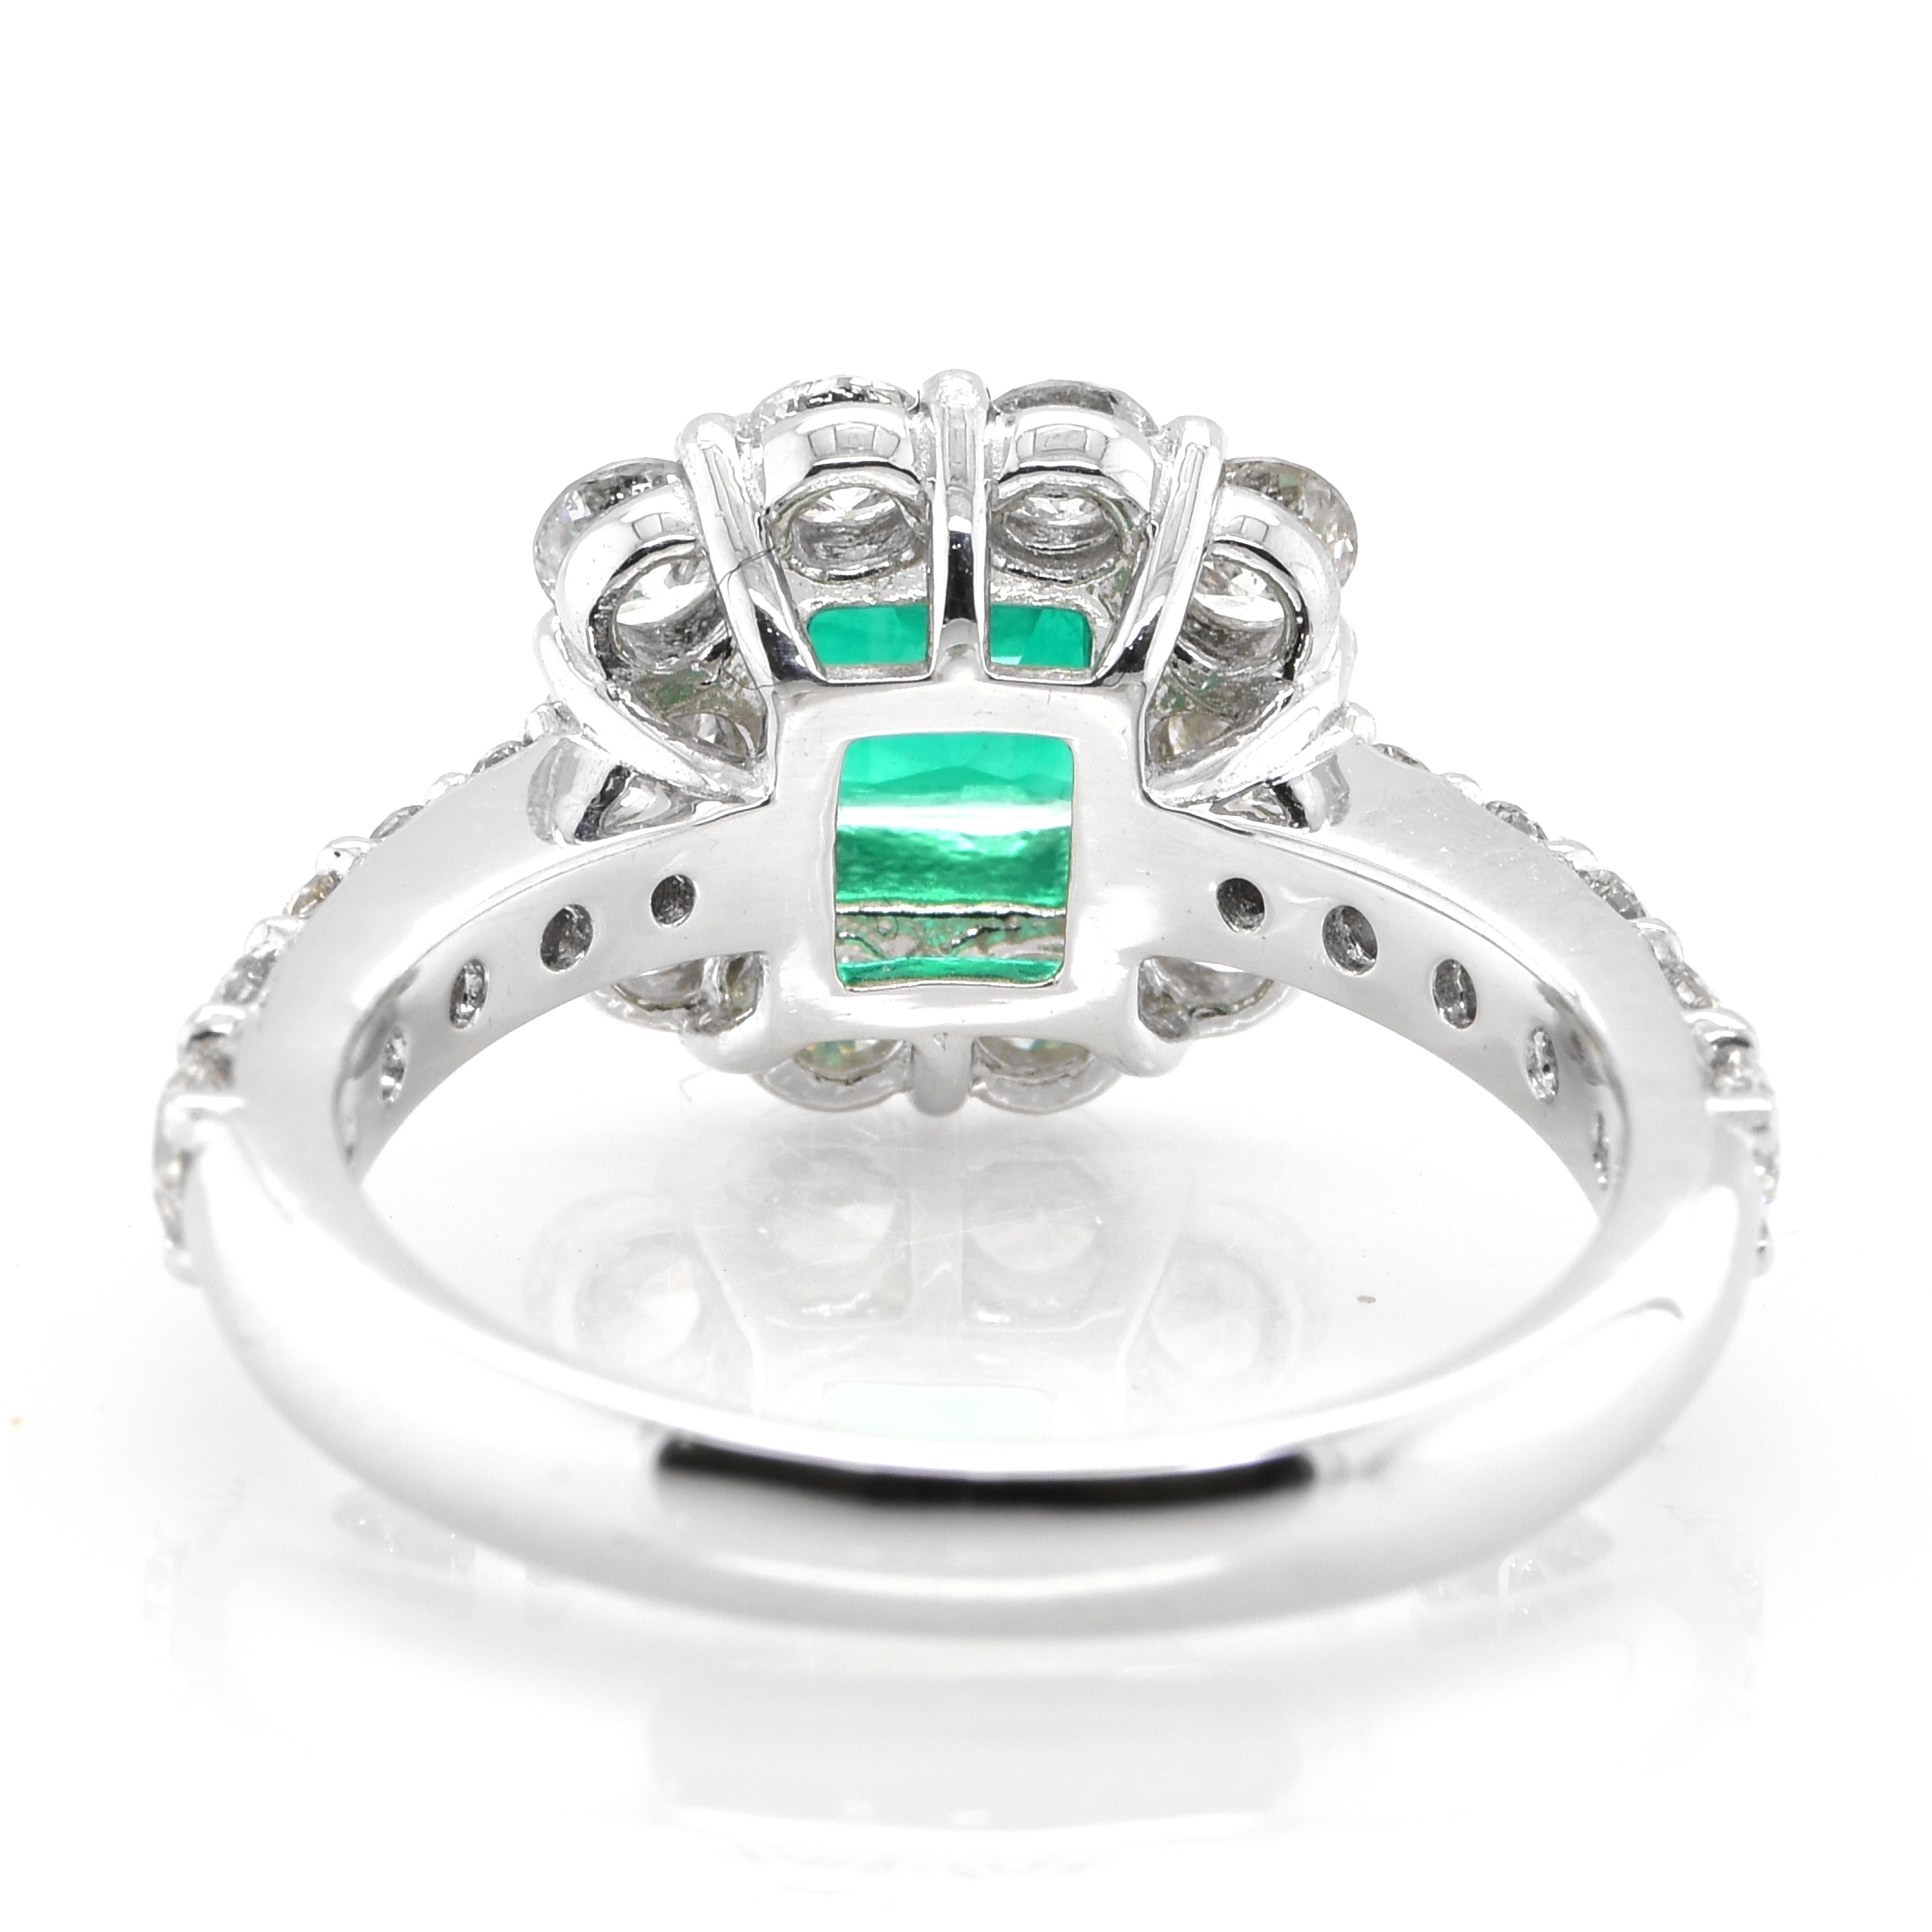 Women's 0.91 Carat Natural Colombian Emerald and Diamond Ring Made in Platinum For Sale